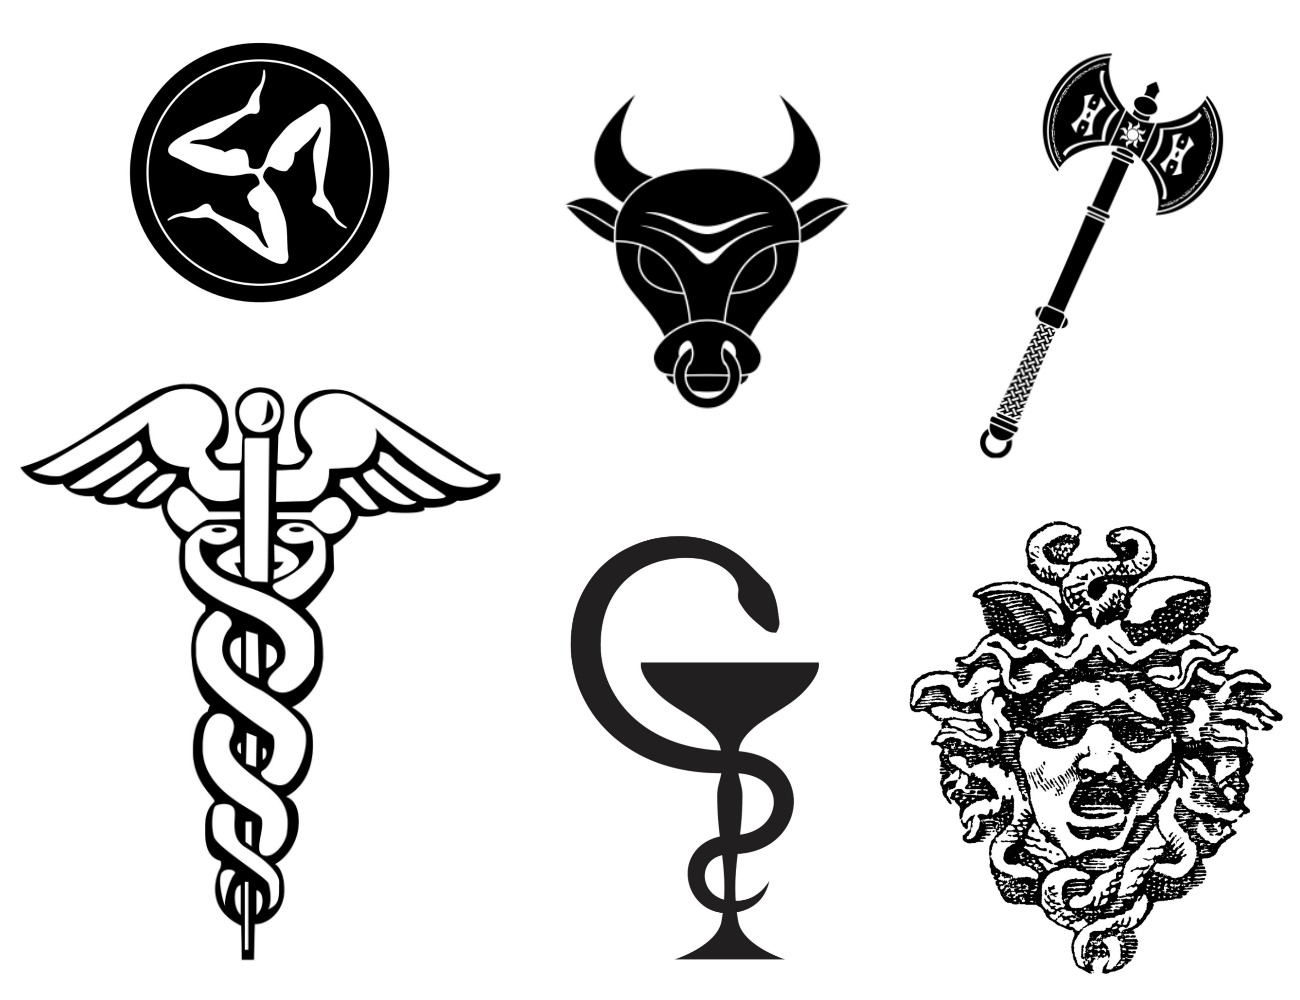 greek gods and goddesses symbols and meanings